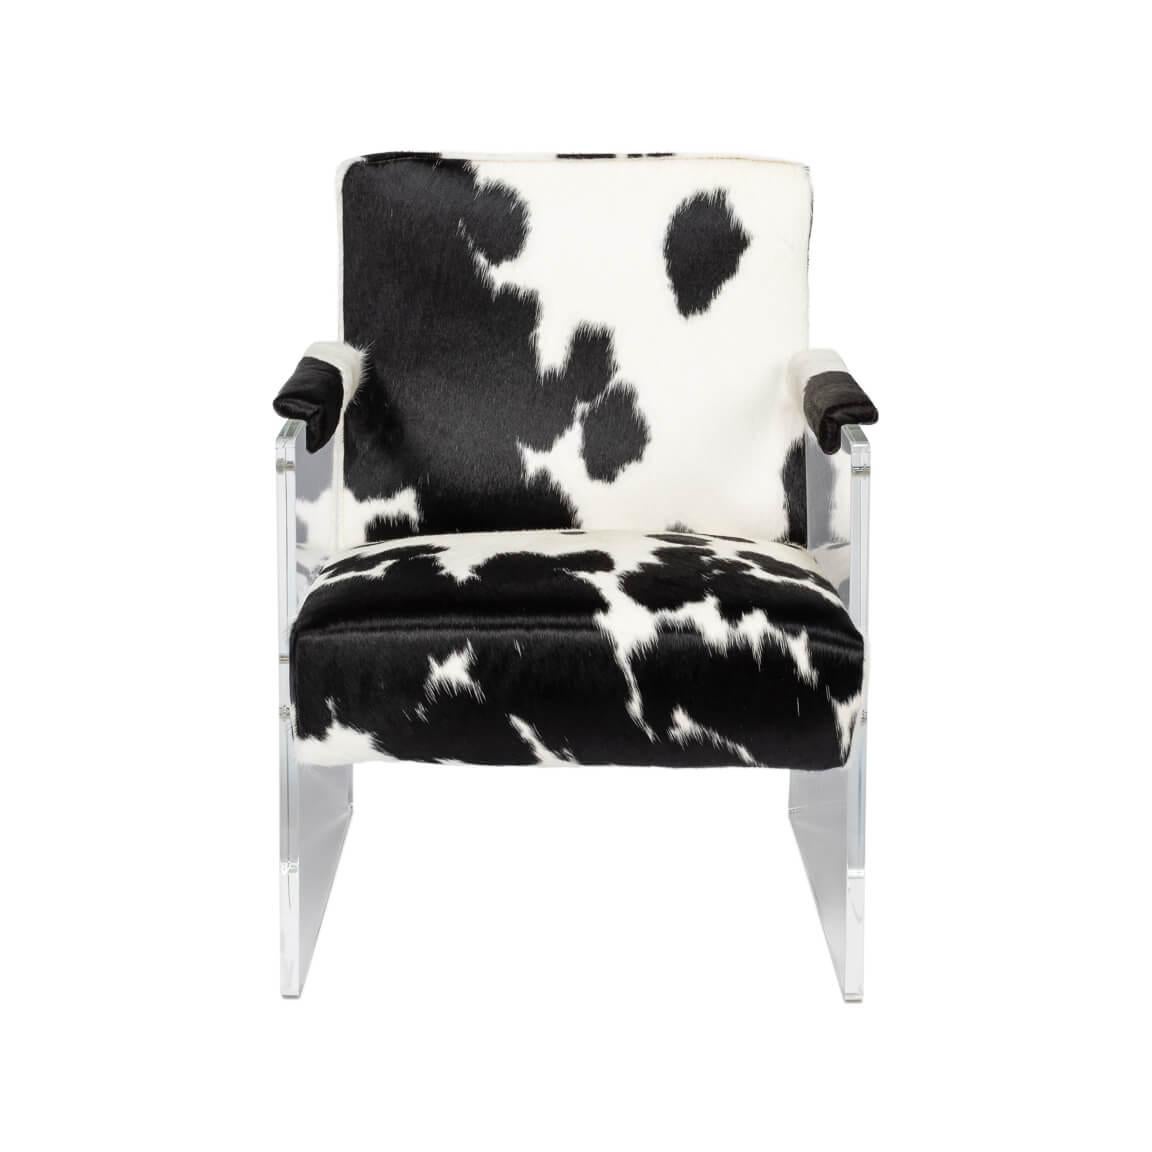 With a modern vintage-western feel, featuring luxe lucite acrylic sides and a black and white cowhide seat and back. A unique combination of materials makes this piece a true statement piece in any room. Cowhide padded arms and a deep seat make this